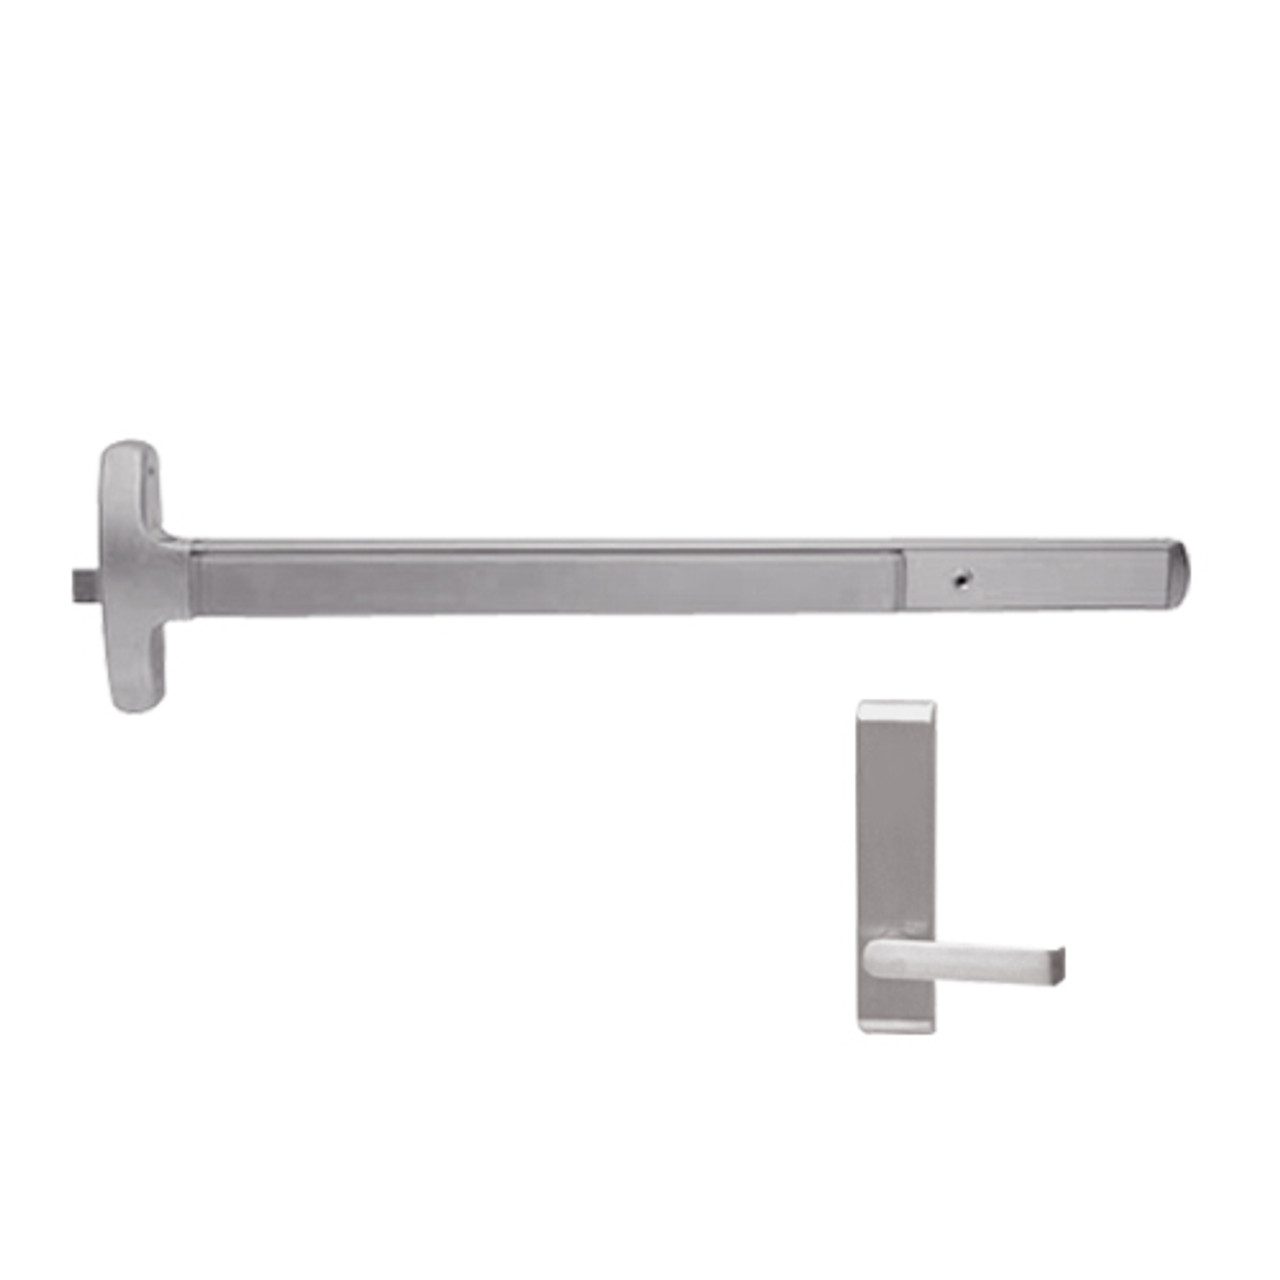 24-R-L-DT-DANE-US32D-4-RHR Falcon Exit Device in Satin Stainless Steel